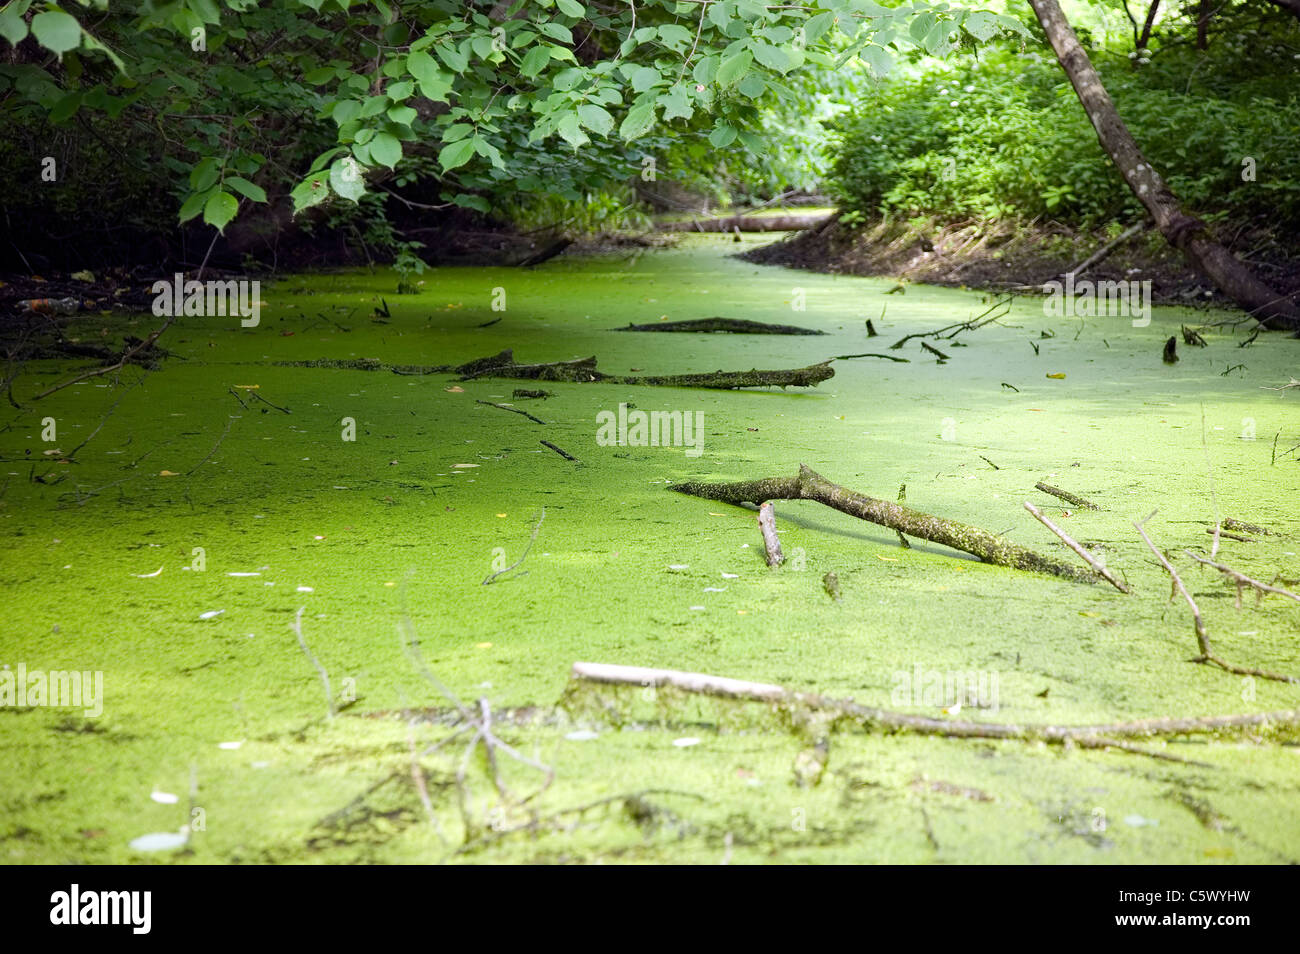 Polluted river with broken branches and green water Stock Photo